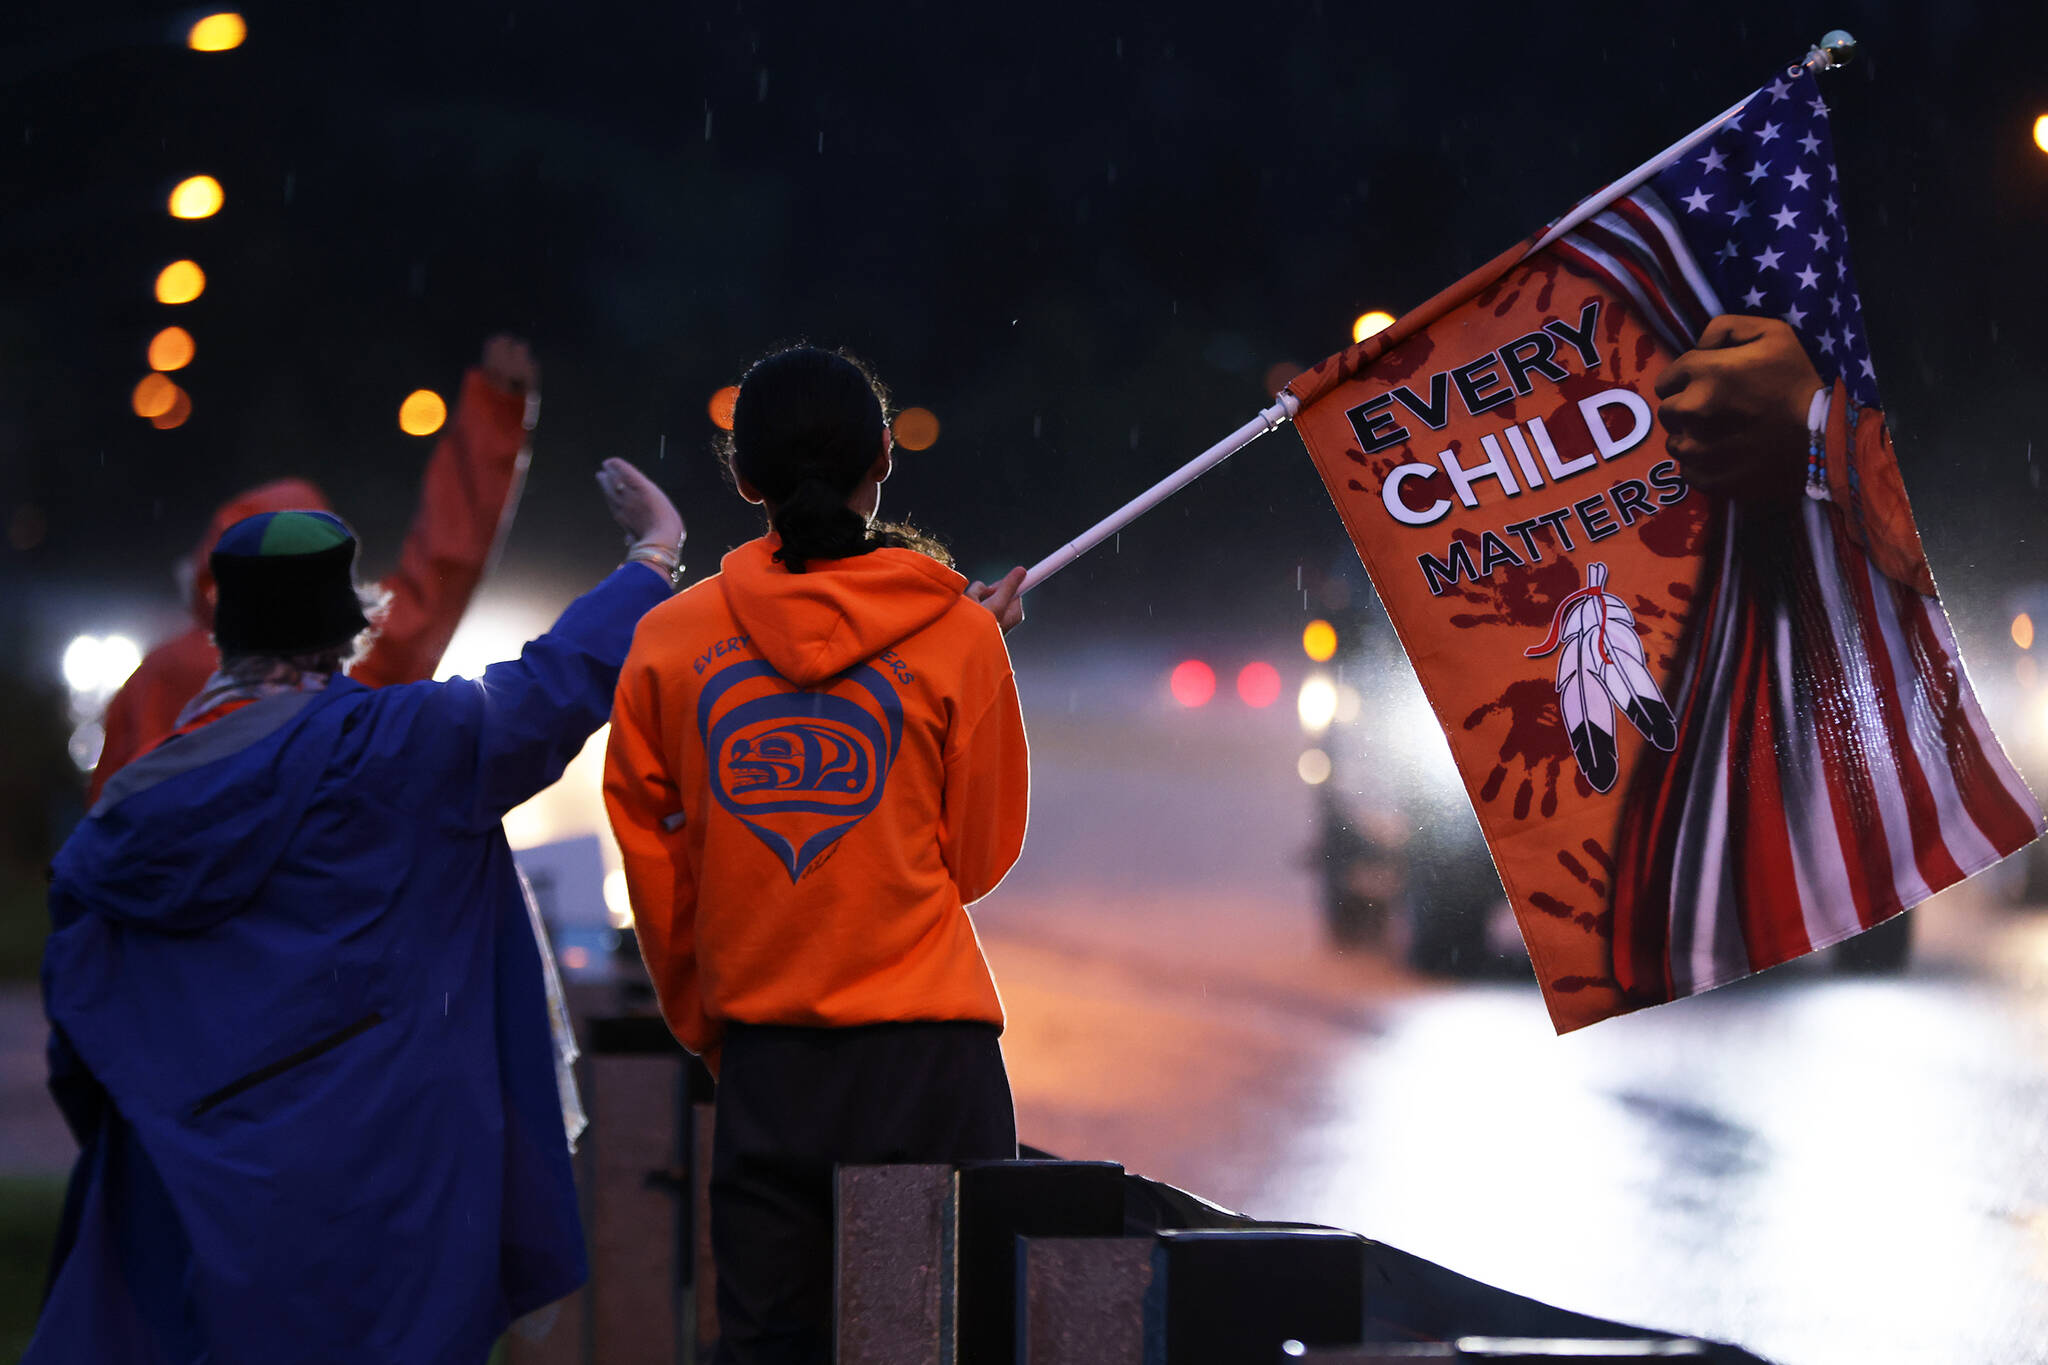 Keagan Hasselquist, 15, holds up a flag bearing the message "Every child matters" during an Orange Shirt Day event Friday morning in Juneau. The event started at 6:45 a.m. Hasselquist said he usually isn't out and about at that time "but I'm doing good with it so far." He said it was awesome to see strong turnout for the event)(Ben Hohenstatt / Juneau Empire)